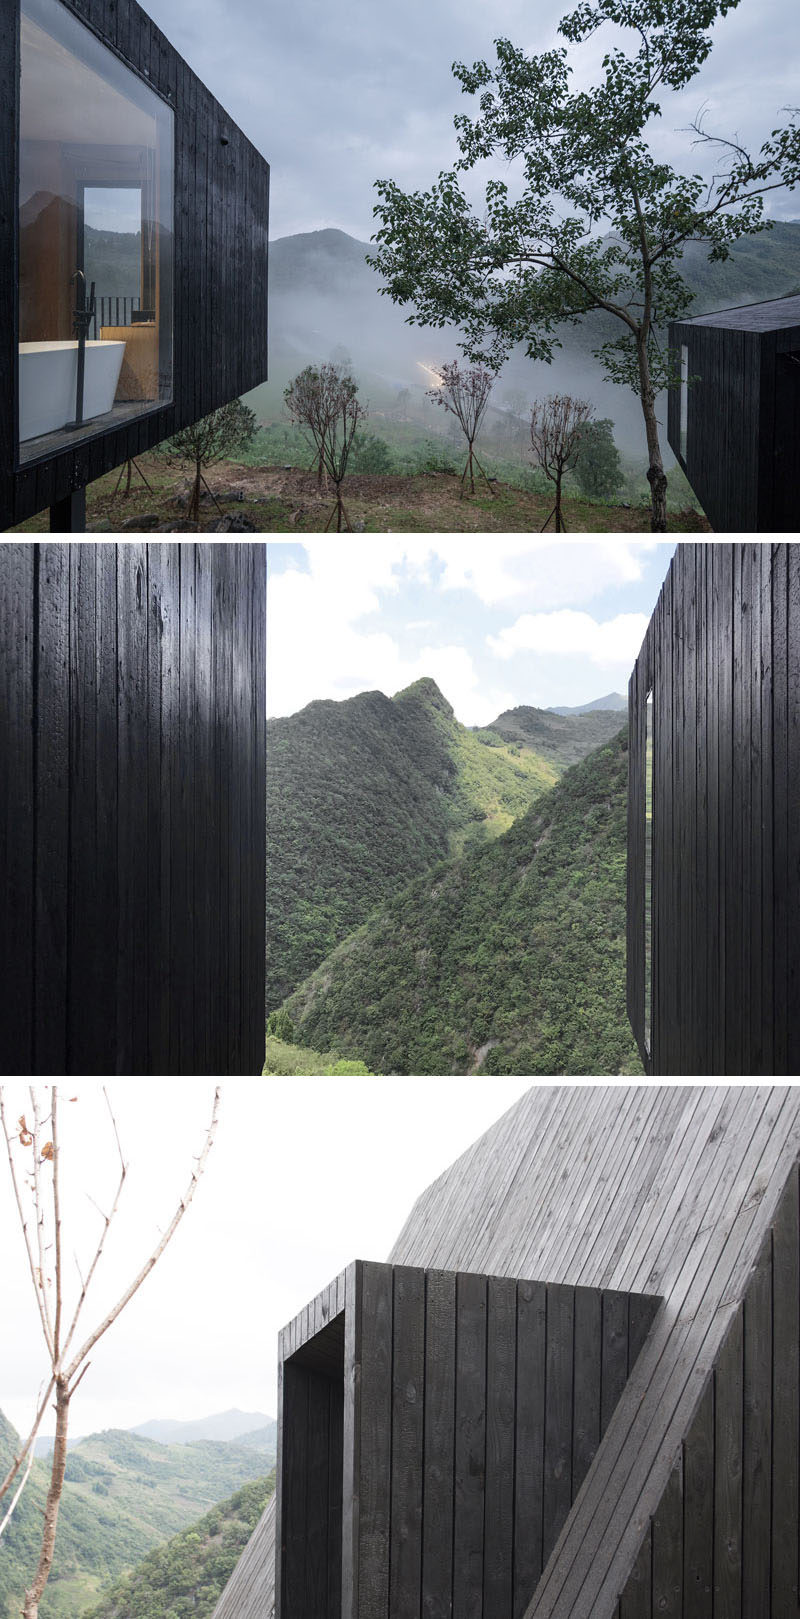 Blackened wood has been used as the exterior material for these cabins in rural China. #ShouSugiBan #Architecture